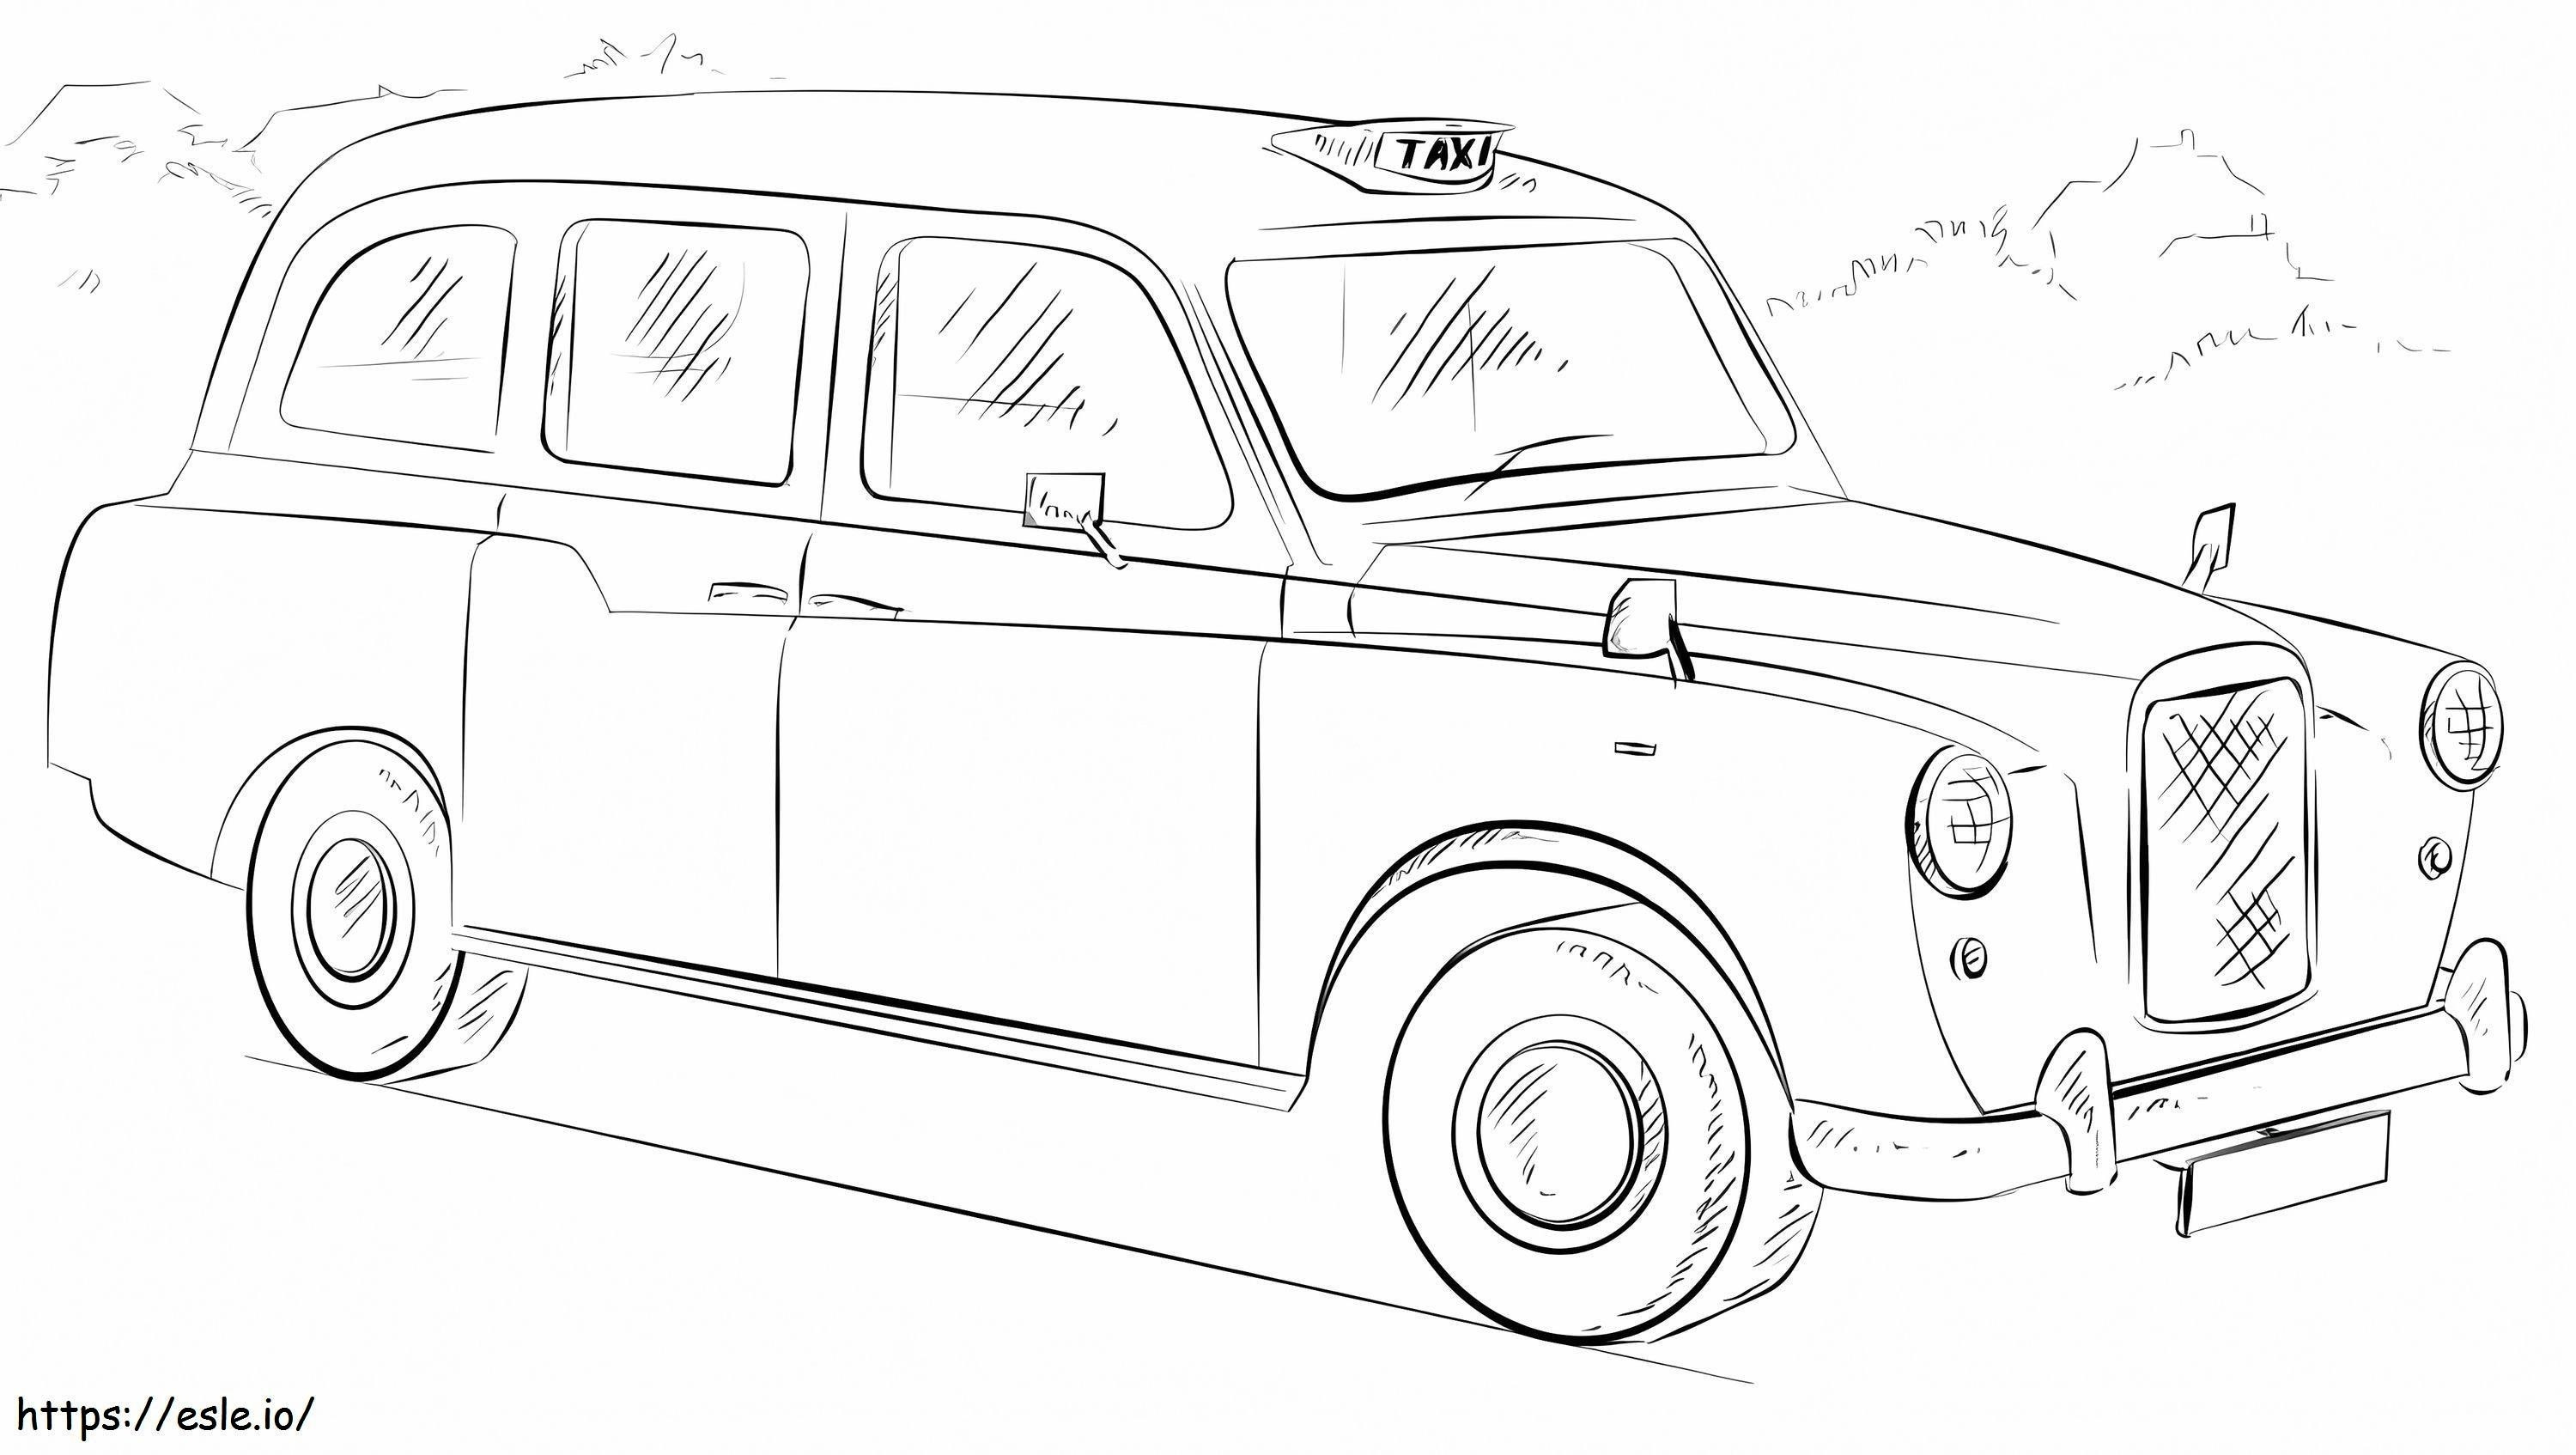 London Taxi coloring page